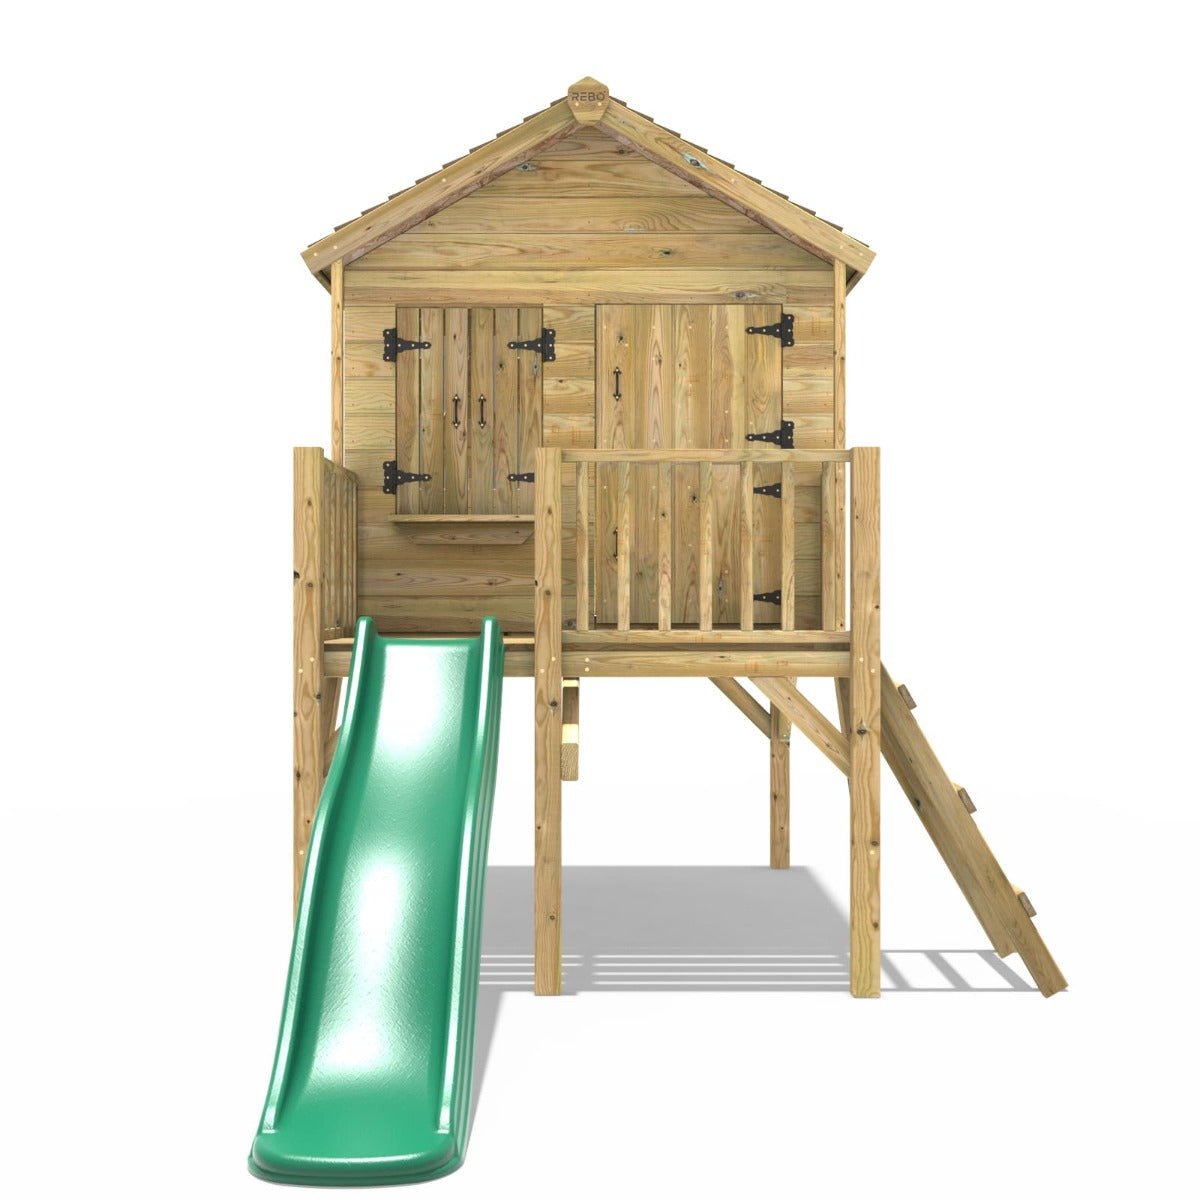 Rebo 5FT x 5FT Childrens Wooden Garden Playhouse on Deck with 6ft Slide - Nightingale Green